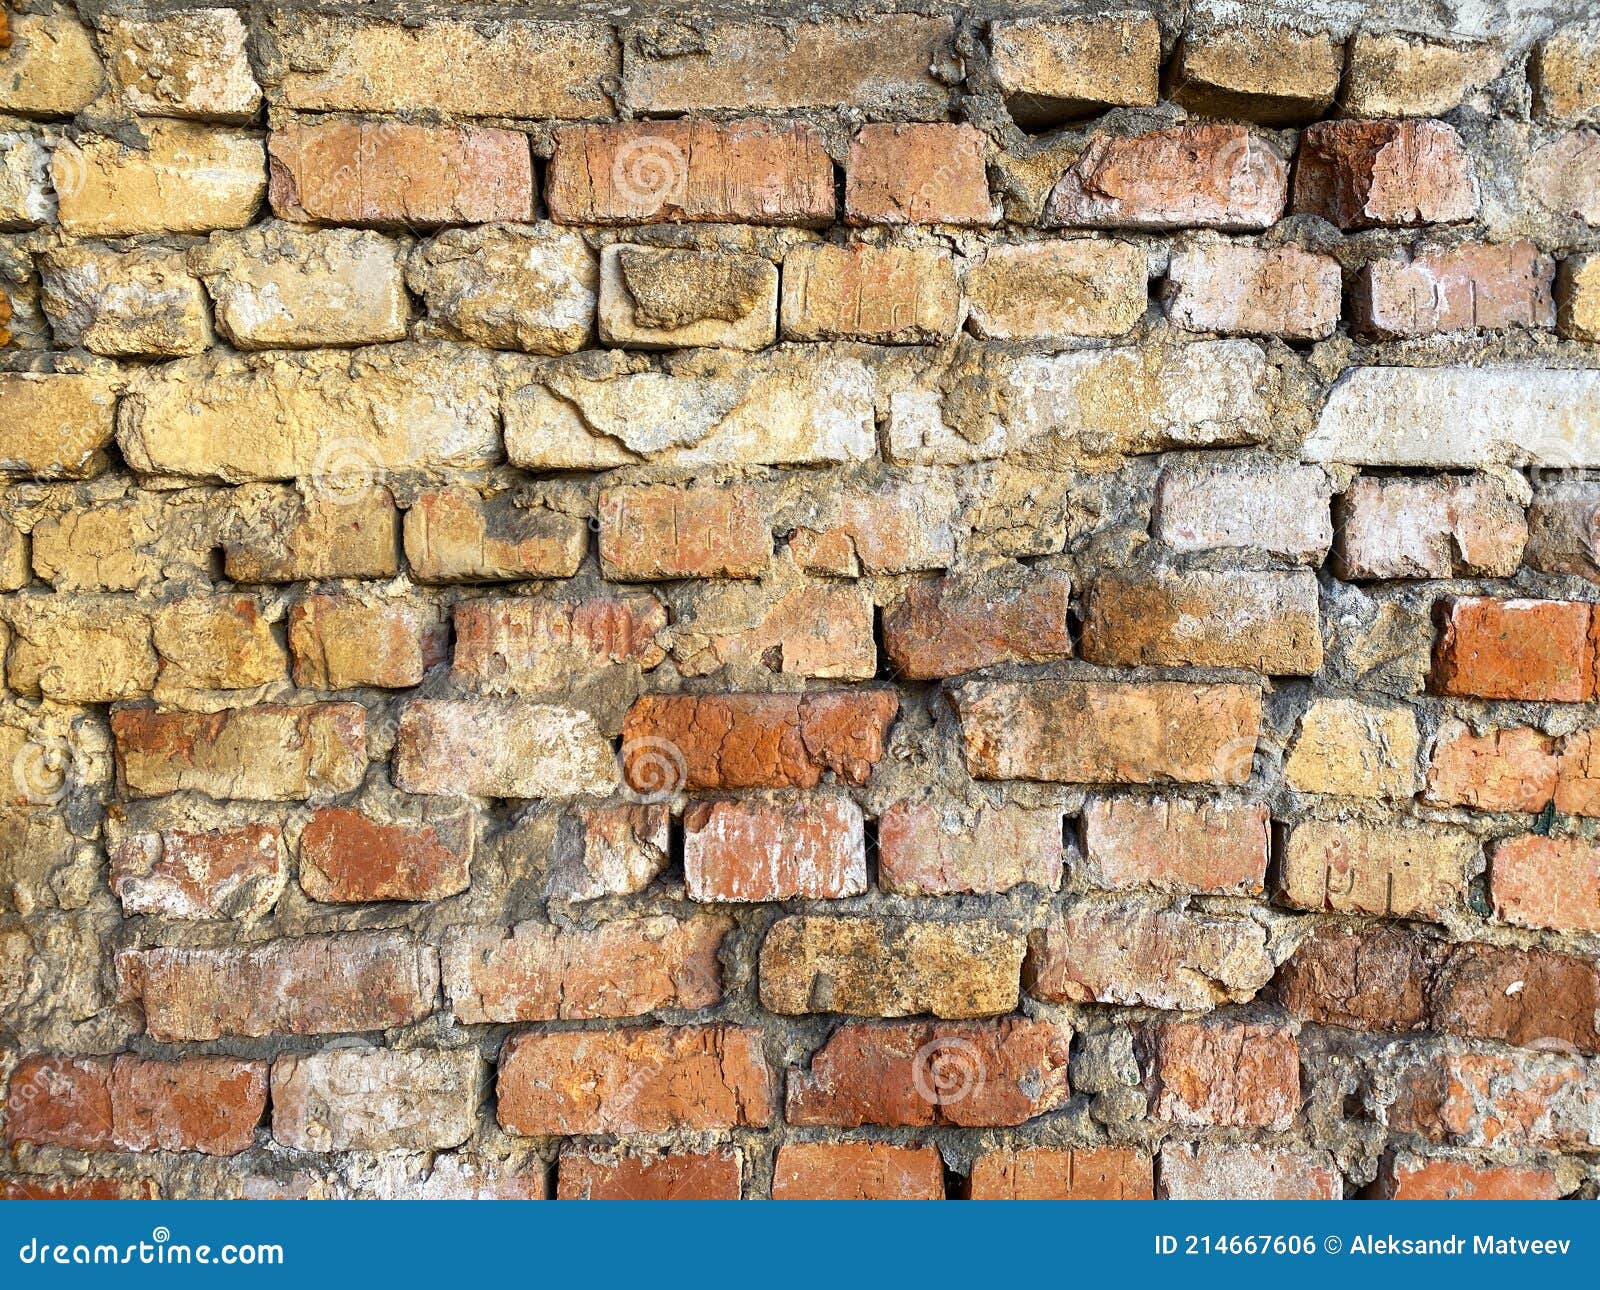 old brick wall. grunge background. bric. rustic style